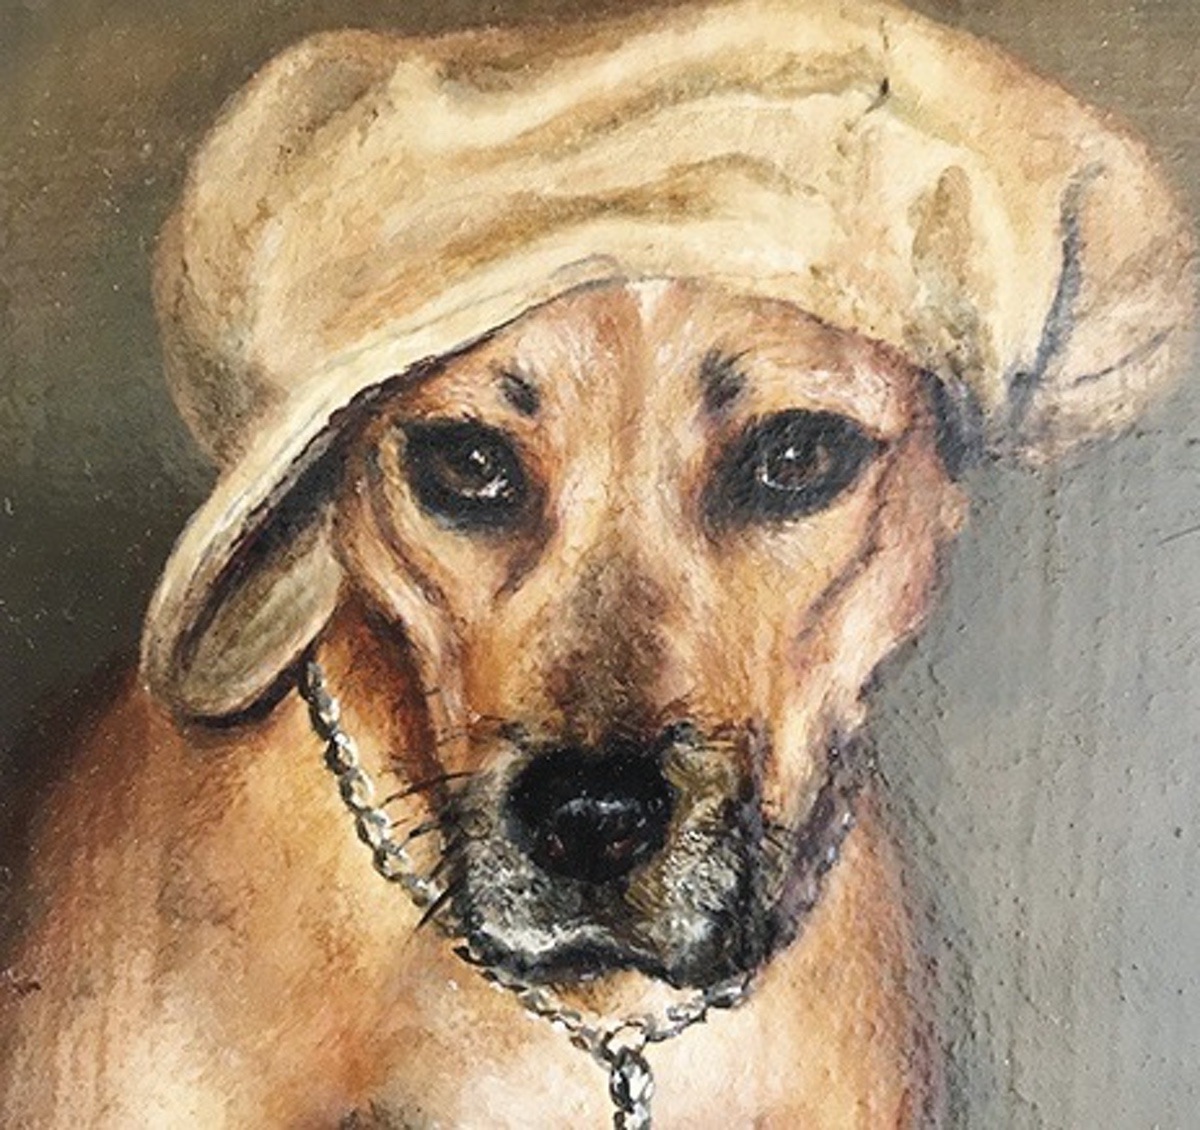 A portrait of Kiley, the first dog Irwin rescued that started her on the path to creating Animal House Shelter and later rescuing over 65,000 dogs and cats. (Photo provided)